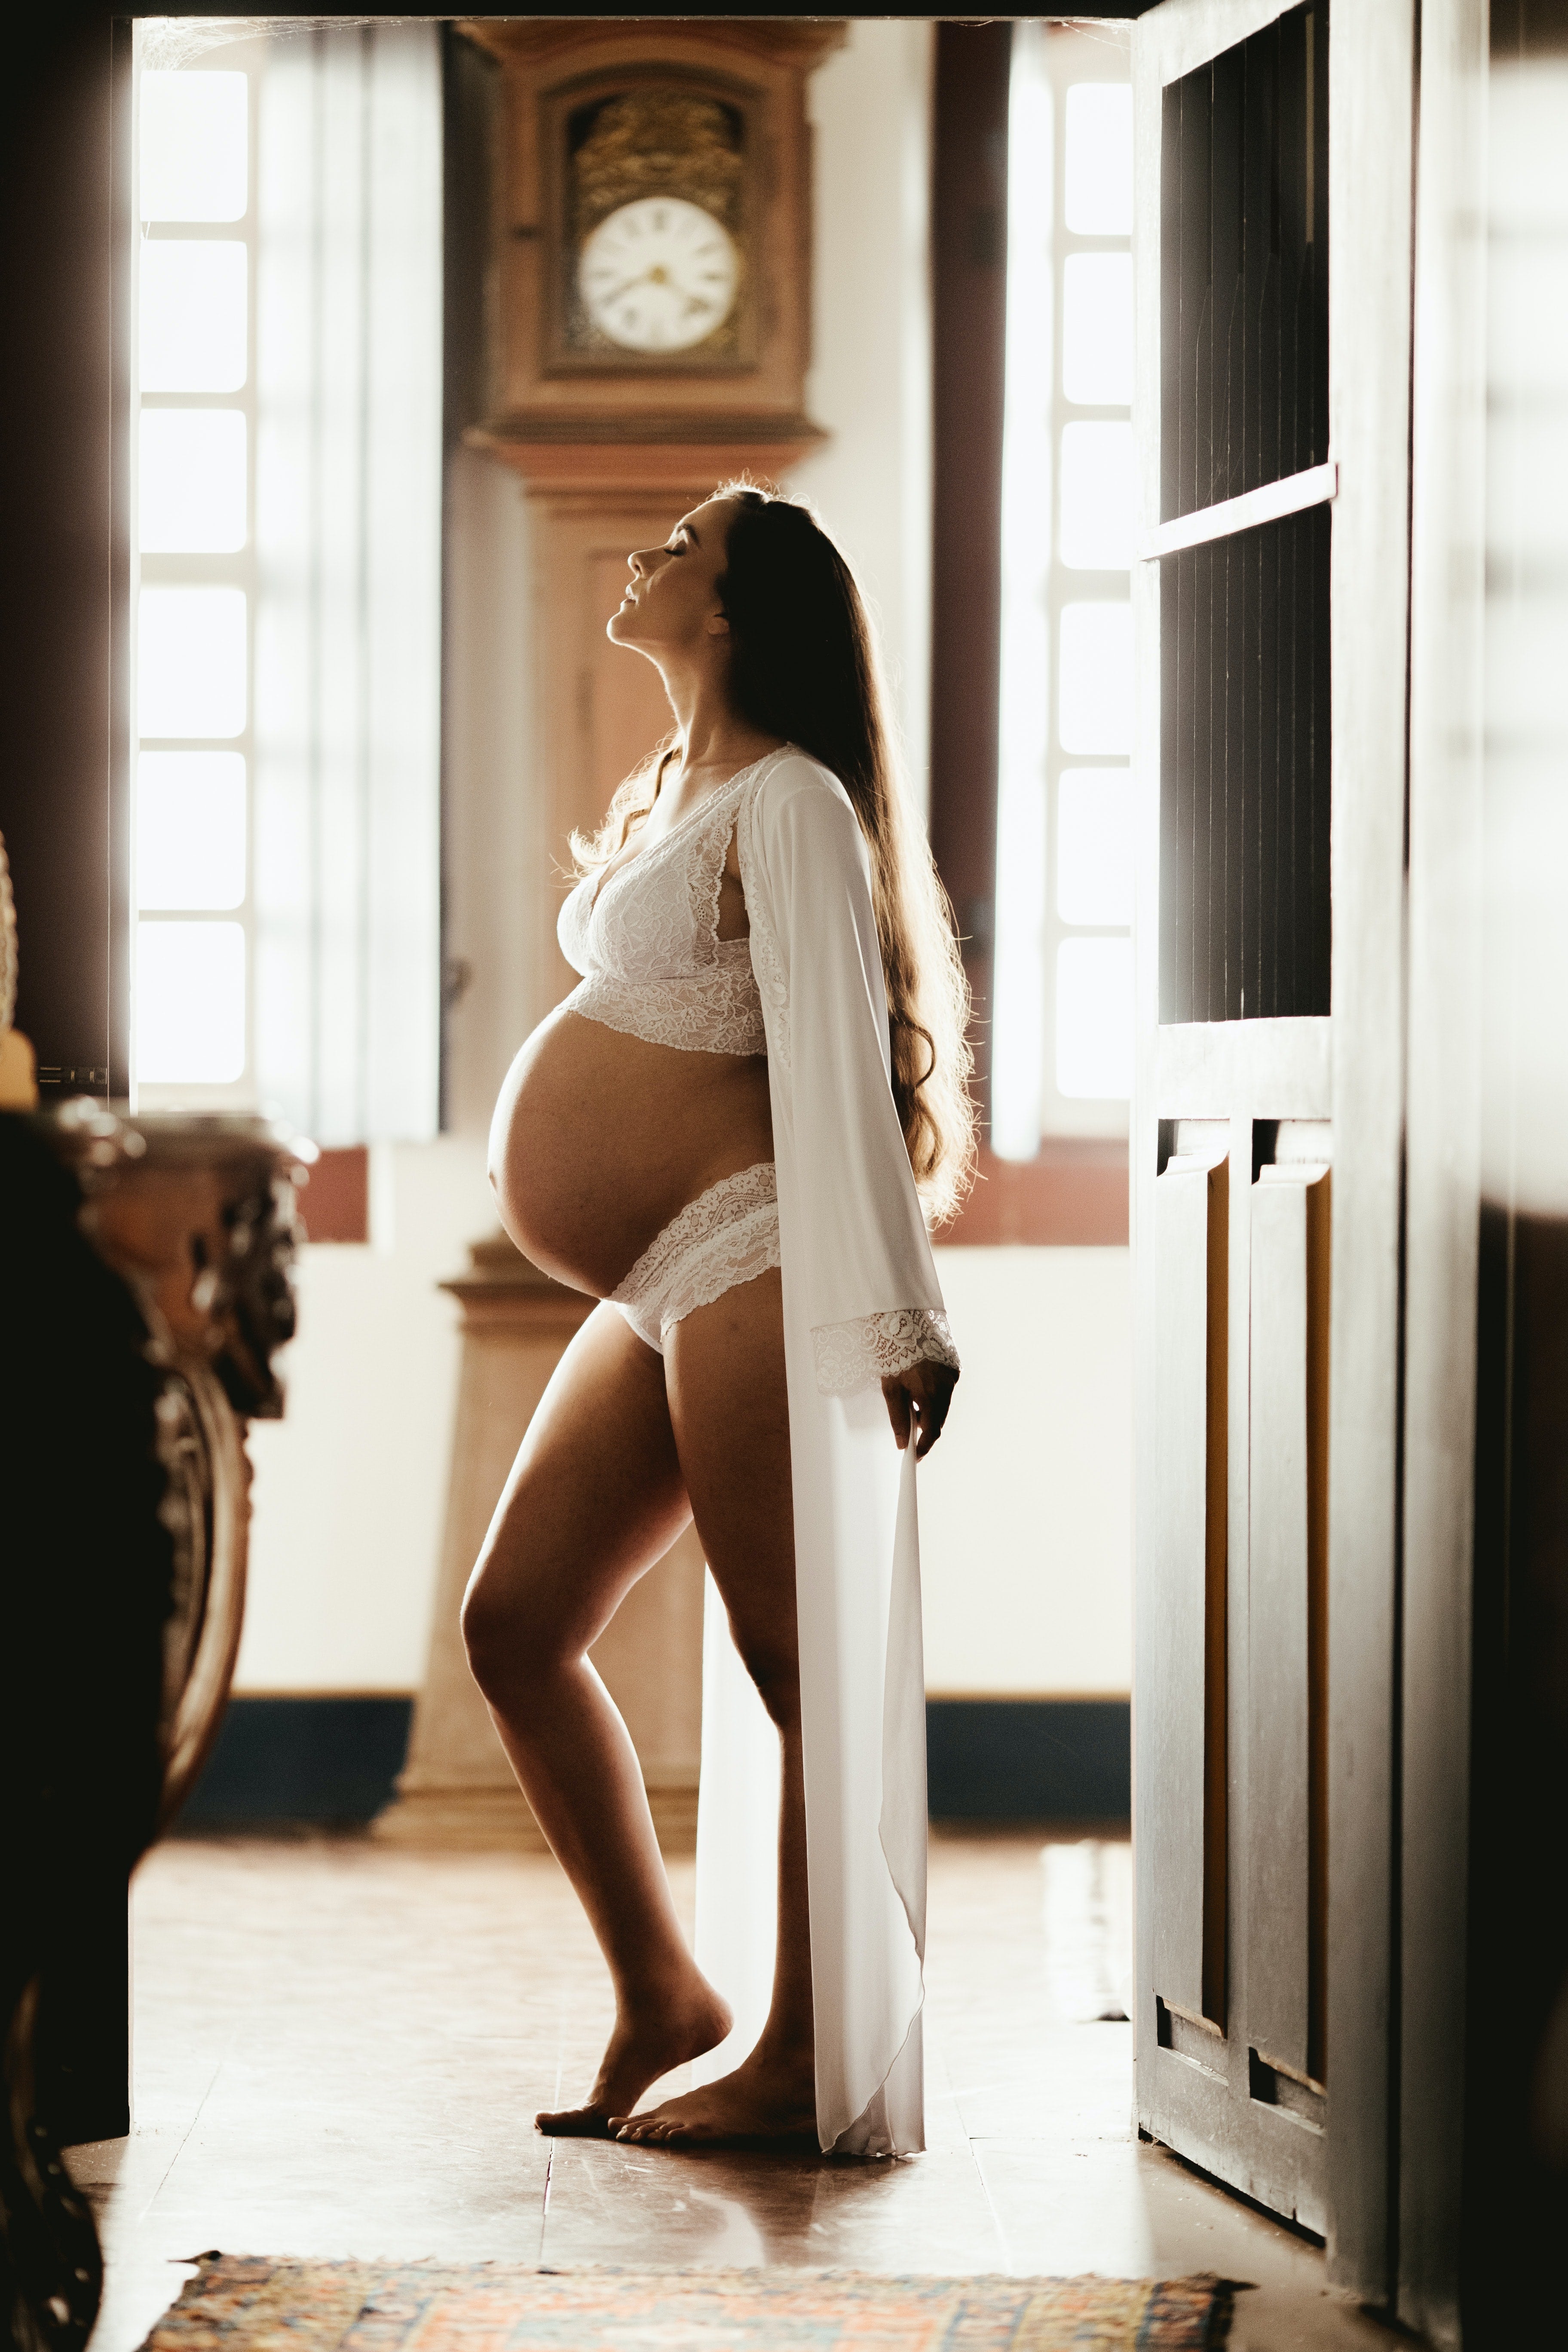 The importance of prenatal vitamins for a healthy pregnancy